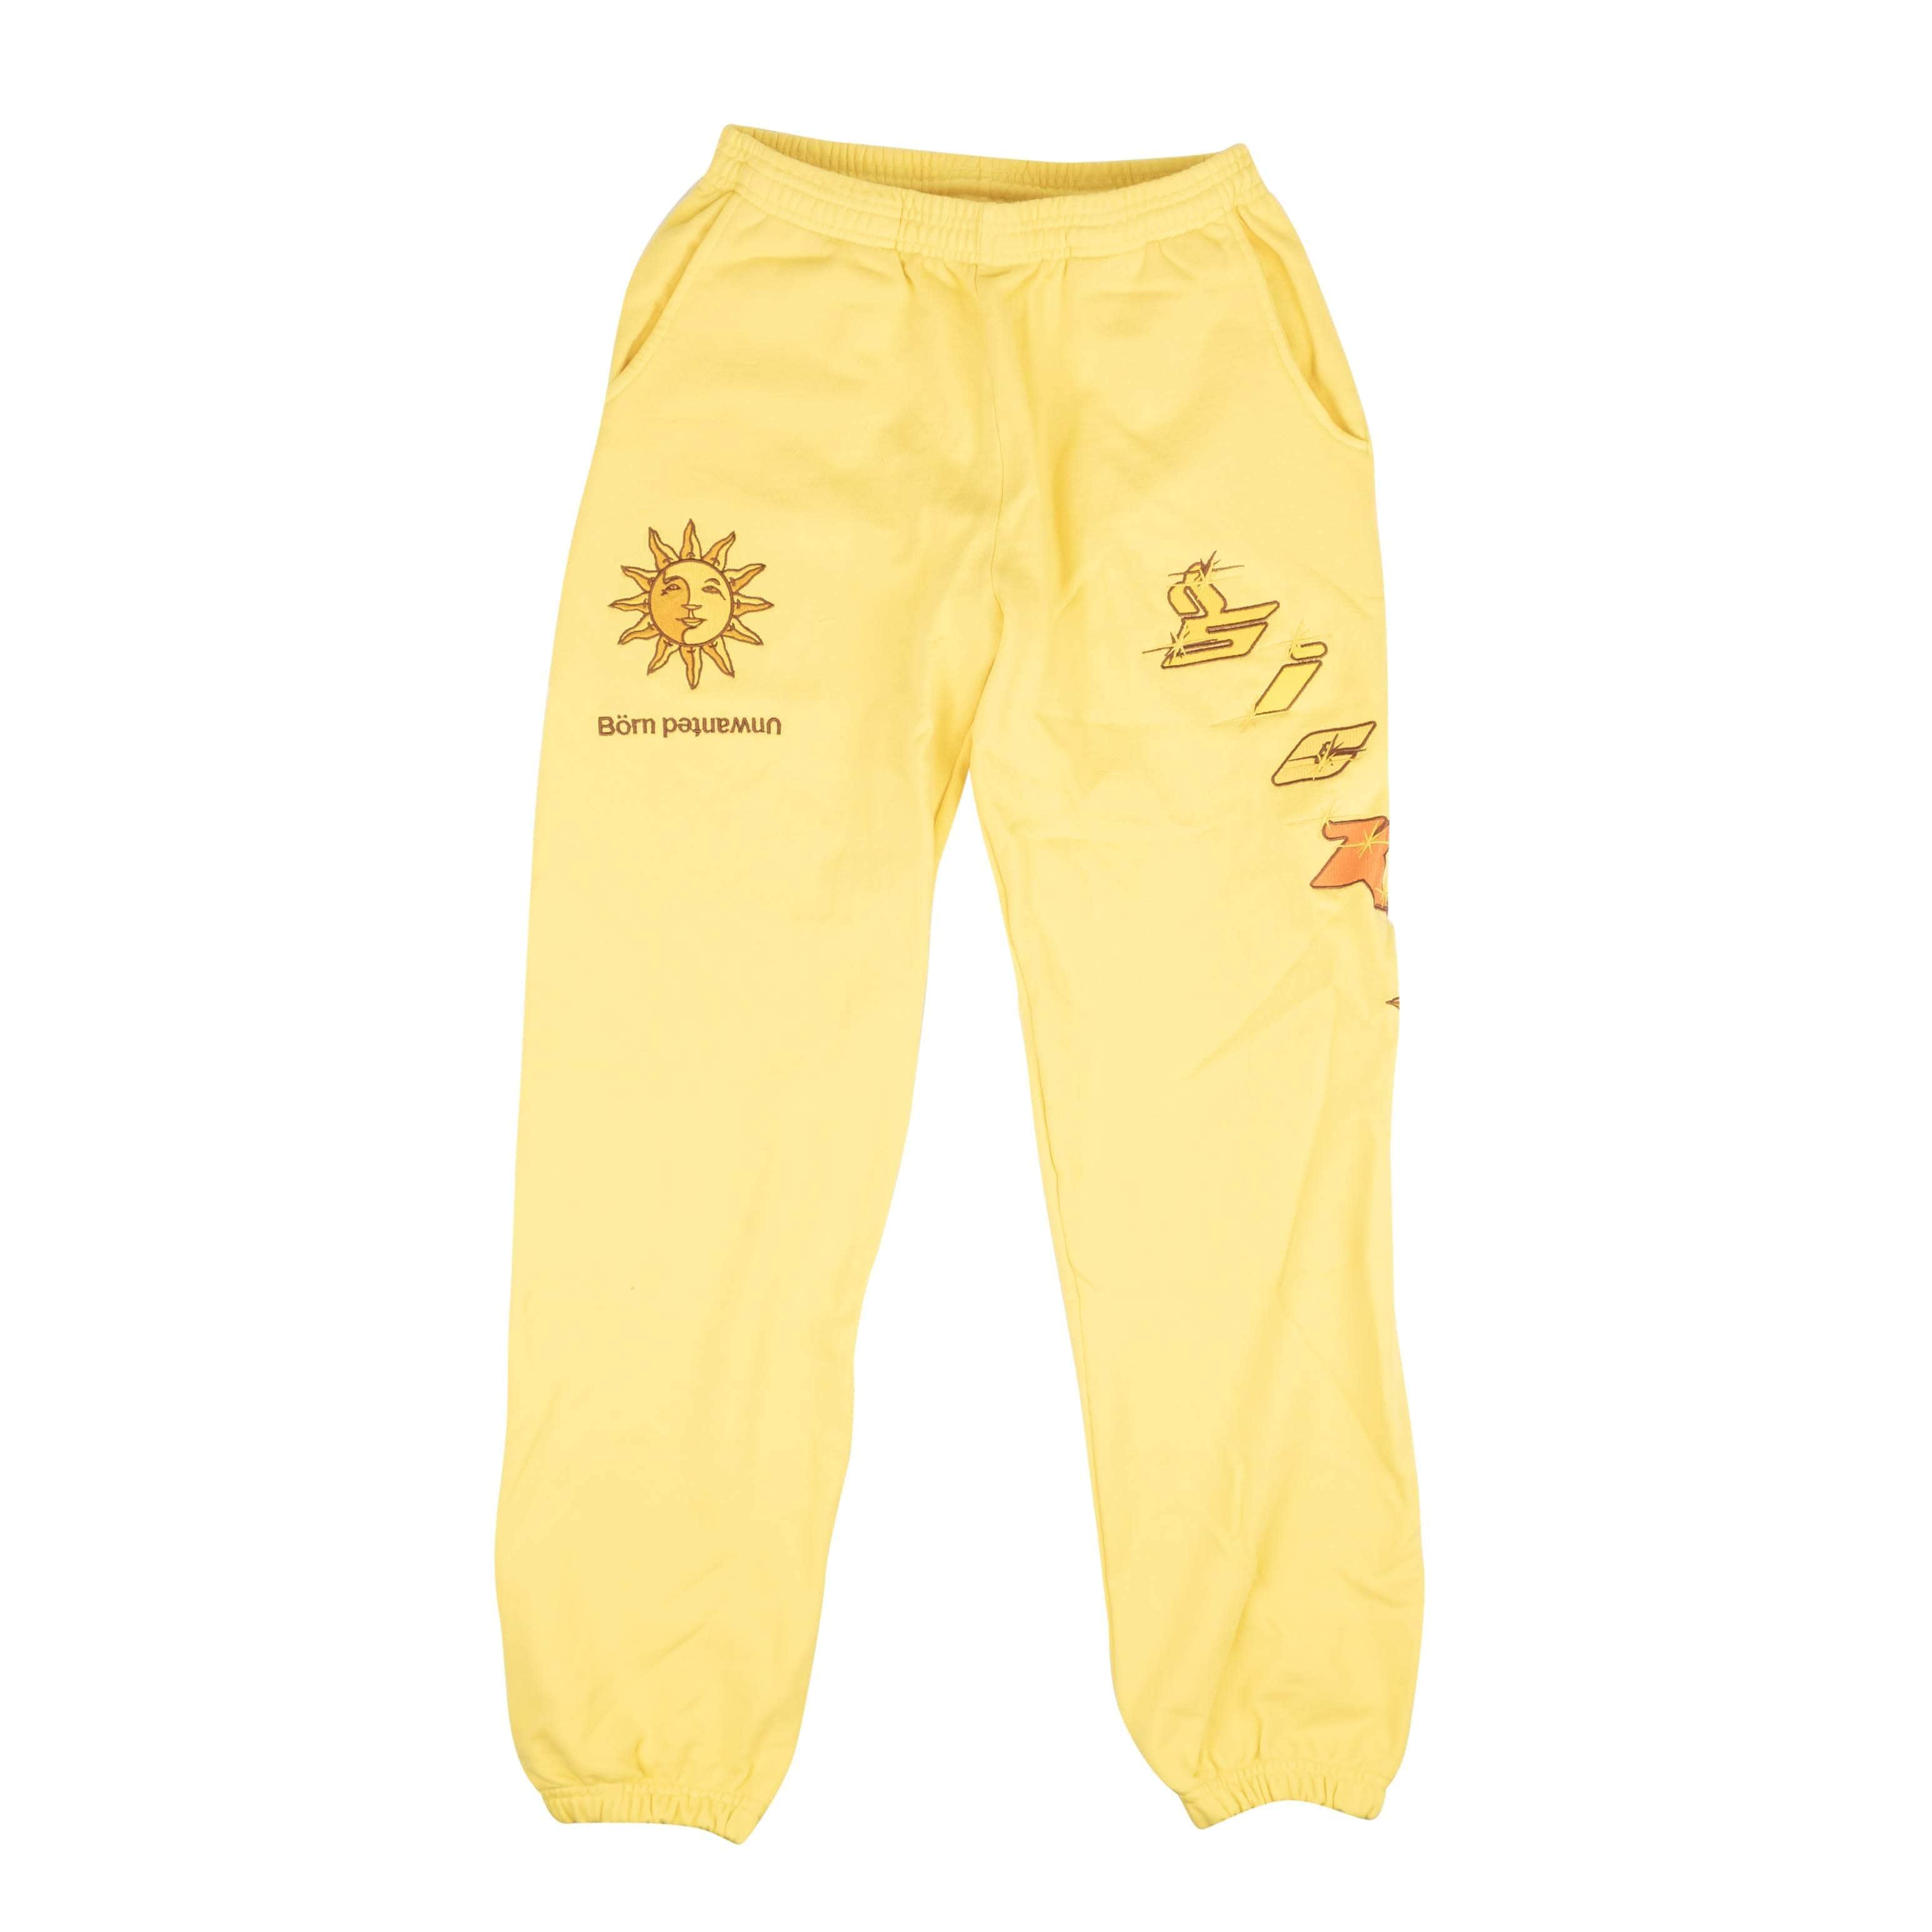 Sicko 250-500, channelenable-all, chicmi, couponcollection, gender-mens, main-clothing, mens-joggers-sweatpants, mens-shoes, sicko, size-l, size-m, size-s, size-xl, size-xxl Yellow Luke.wav Embroidered Sweatpants